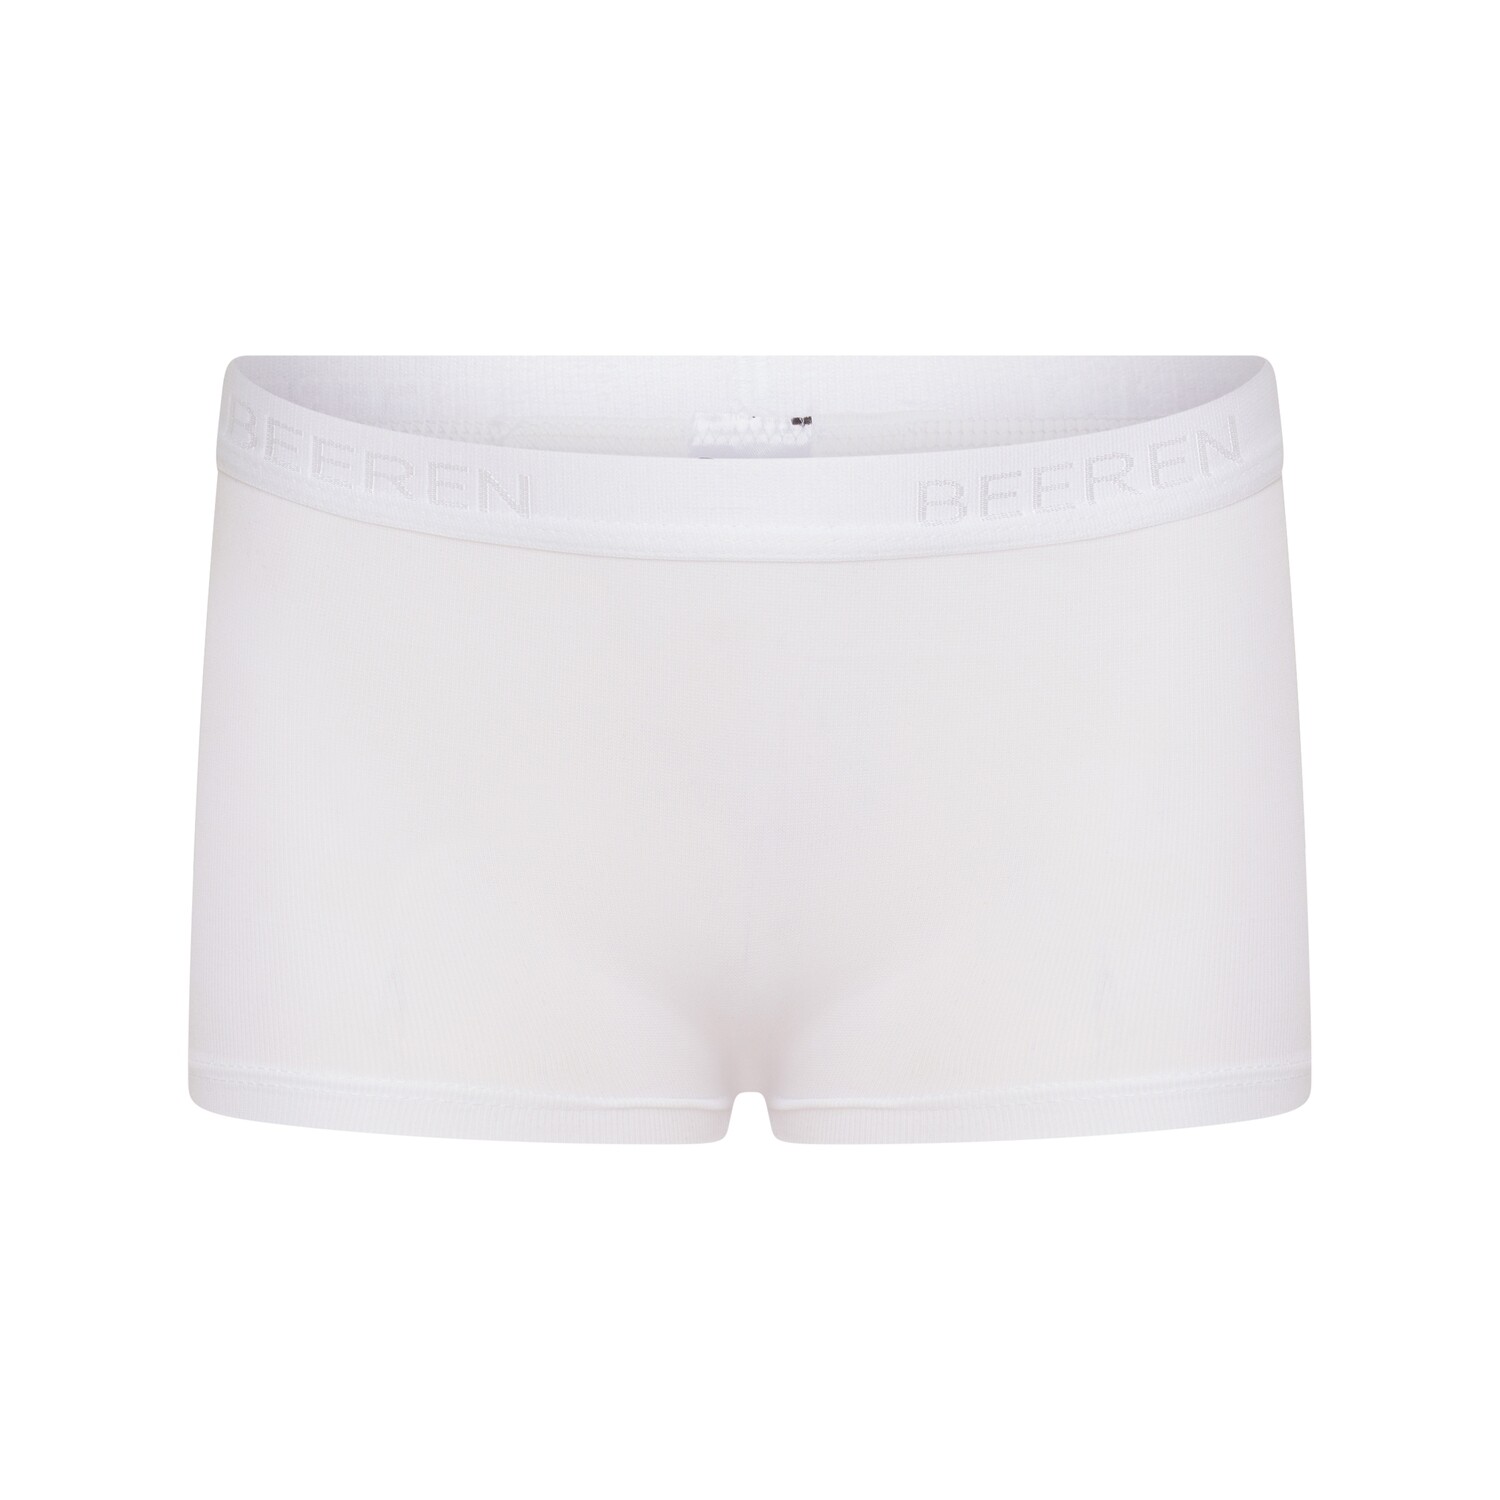 (21-153) Meisjes boxer Young wit 128/140